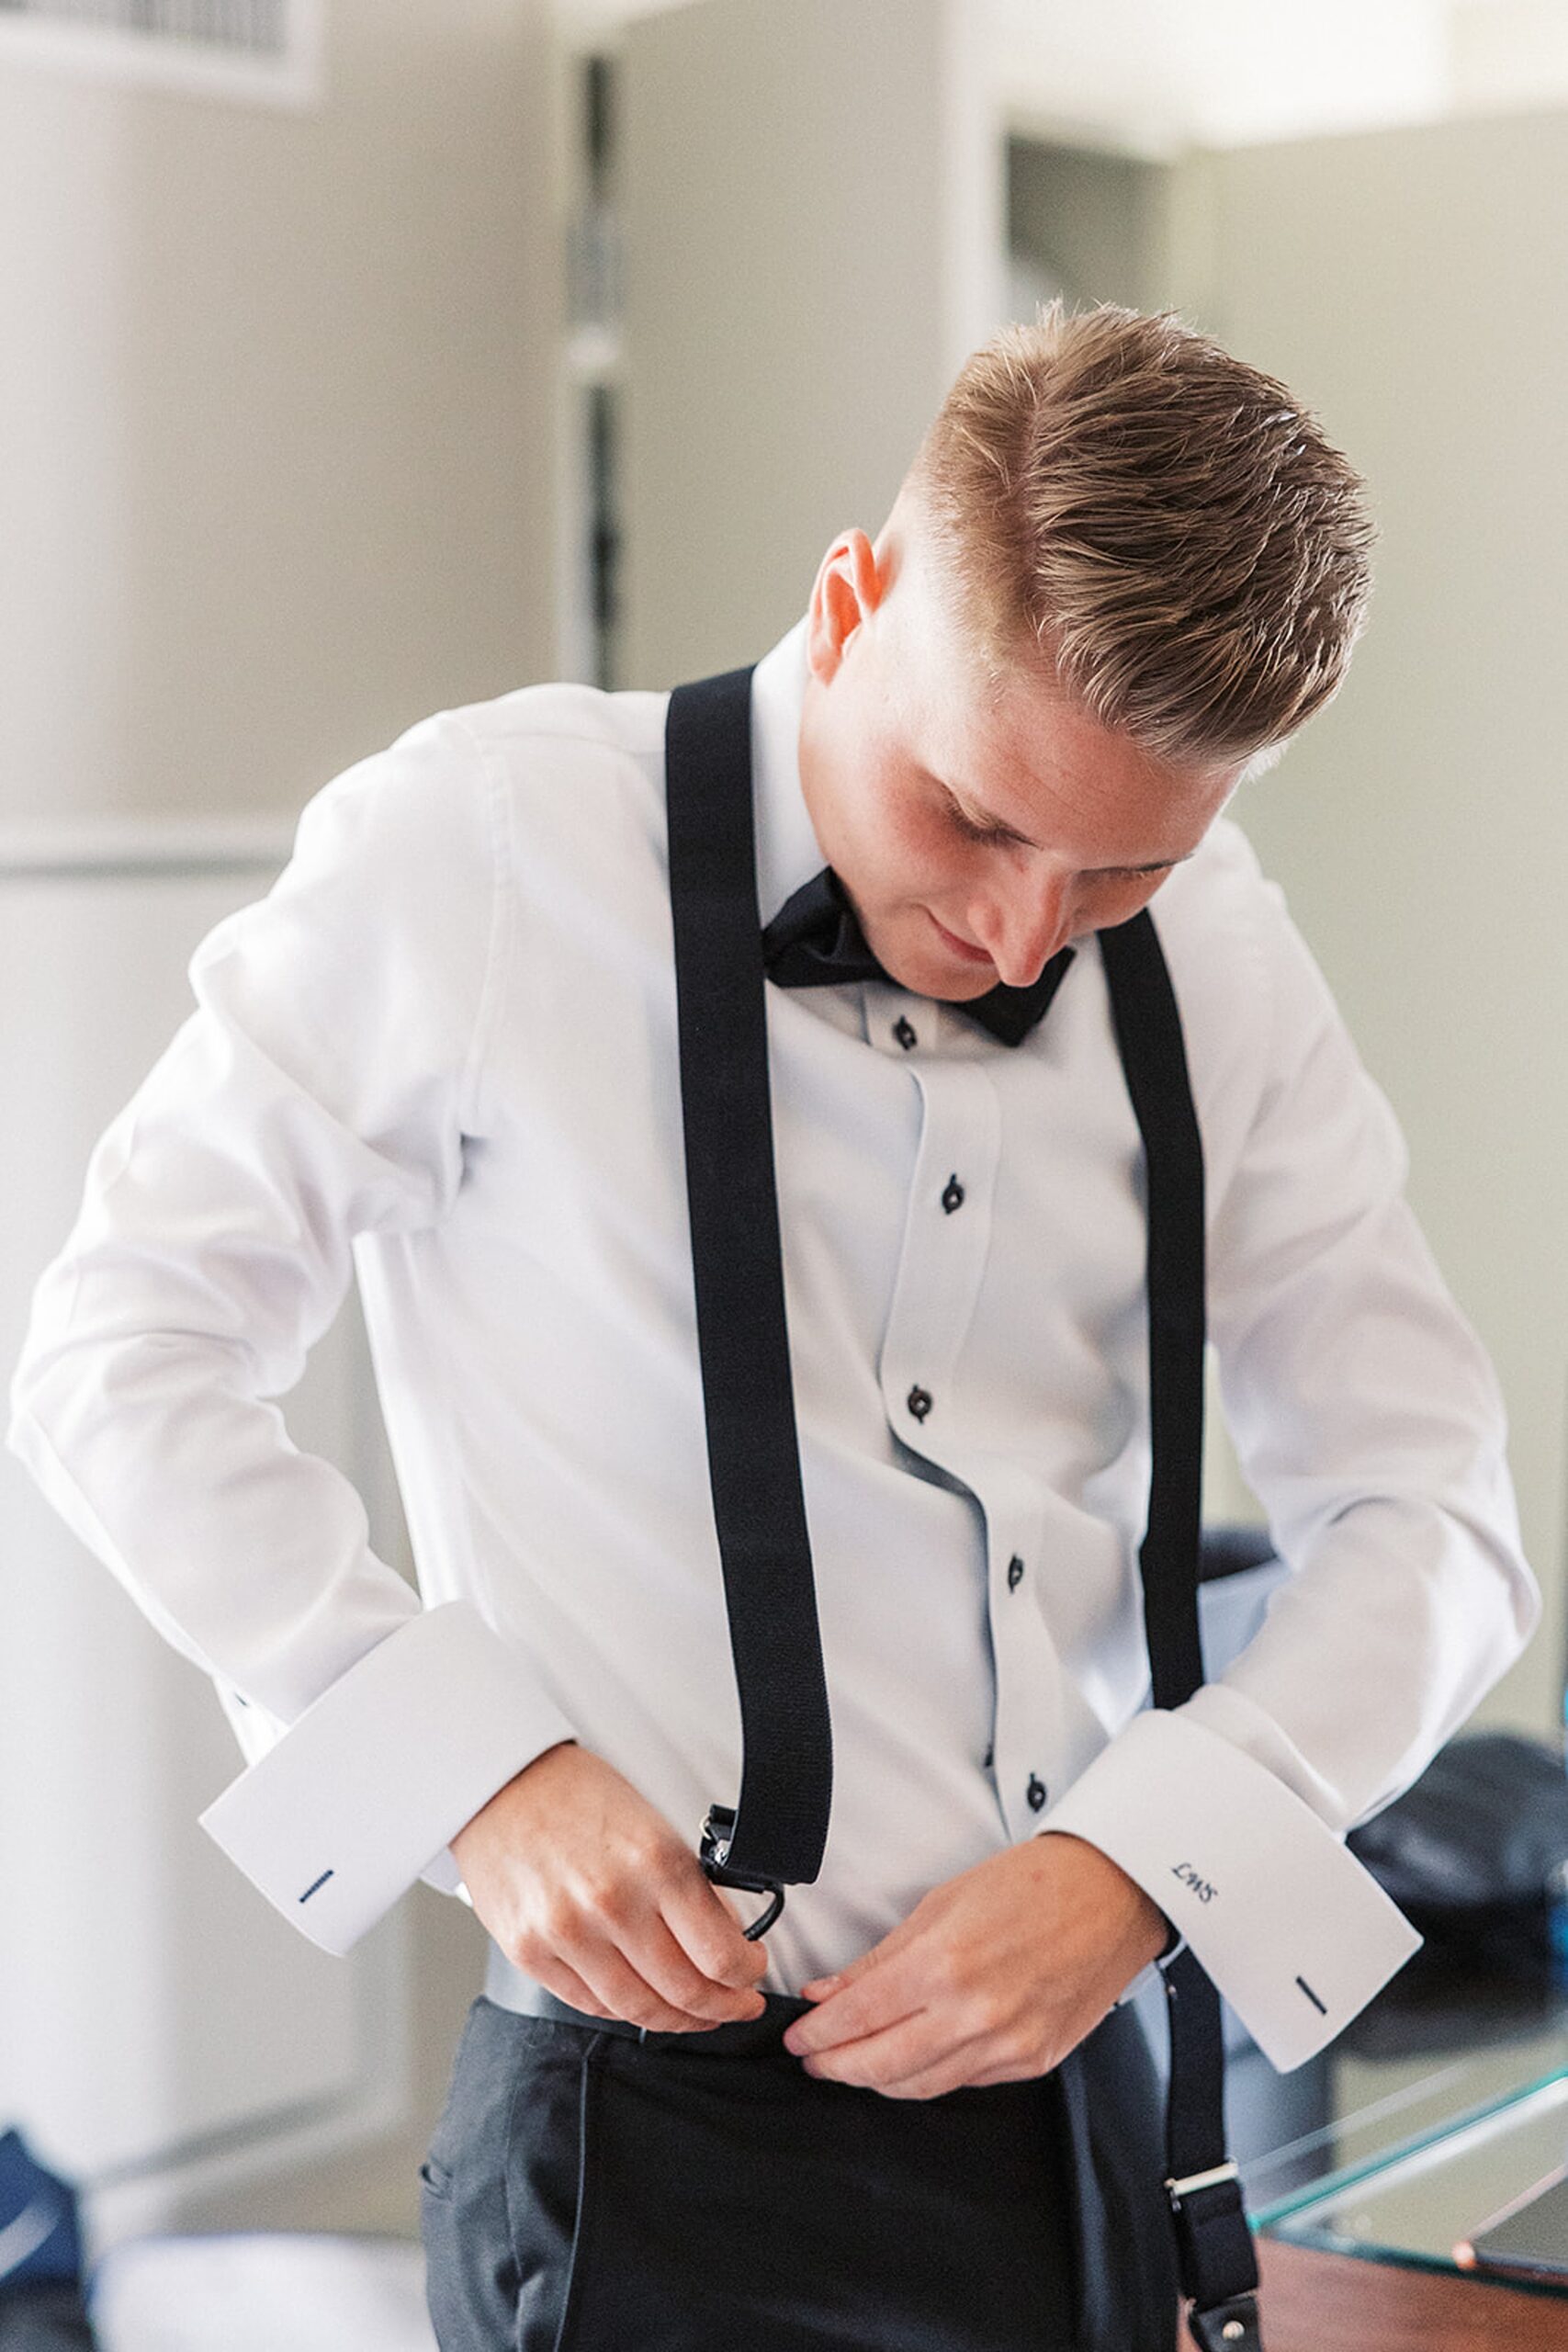 A groom attaches his suspenders while getting ready for his wedding